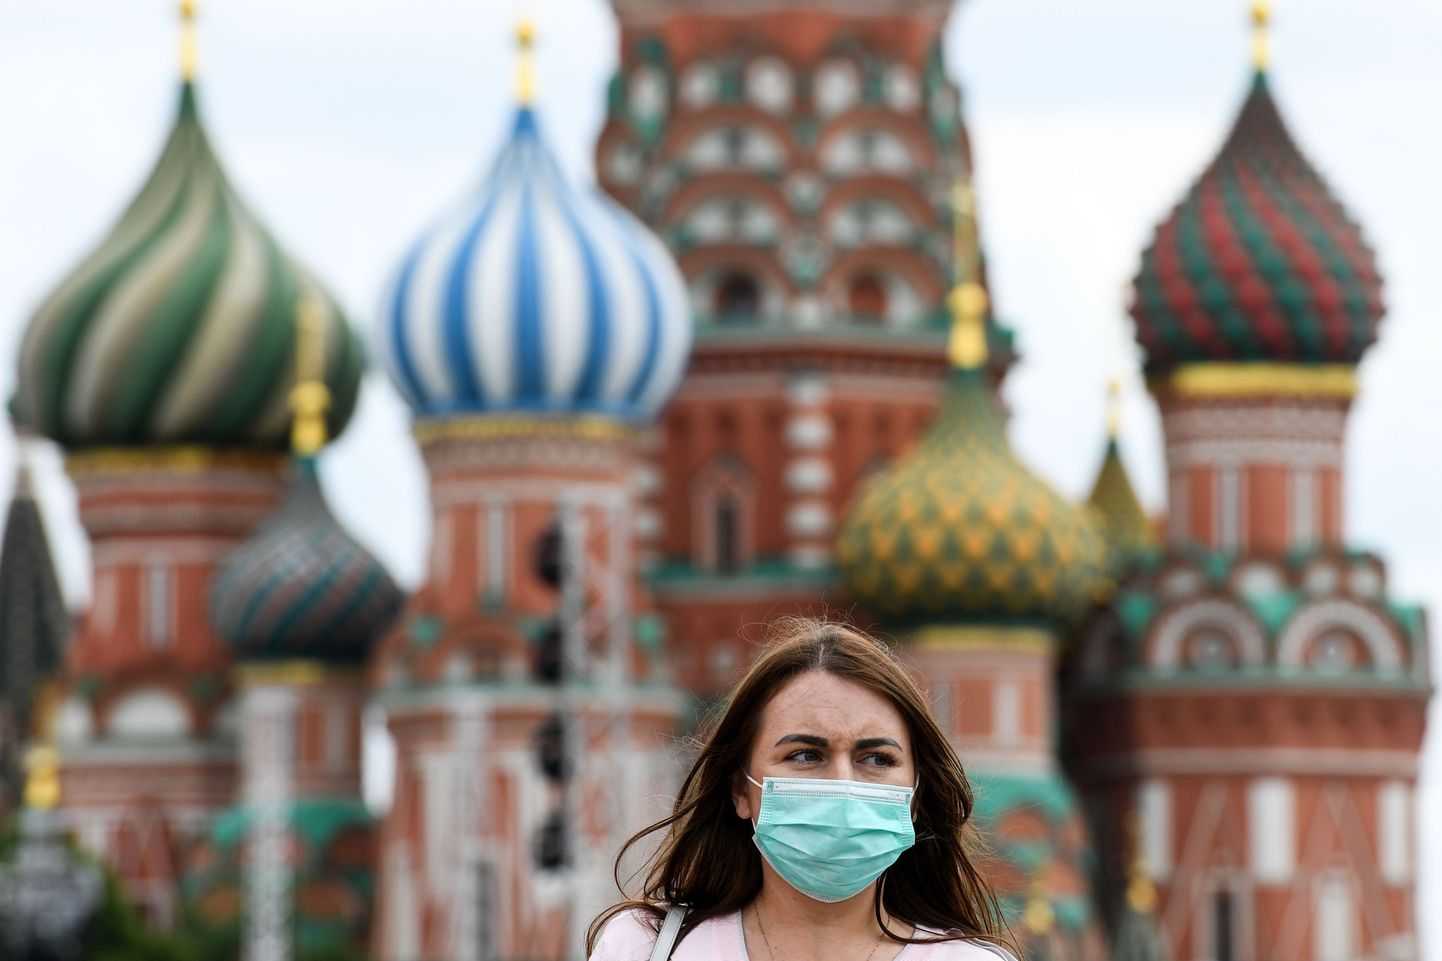 A woman wearing a protective face mask walks in front of the Saint Basil's Cathedral as part of the annual book fest on the Red Square in downtown Moscow on June 6, 2020, during the first public event since the country eased lockdown measures taken to curb the spread of the COVID-19 pandemic, caused by the novel coronavirus. (Photo by Kirill KUDRYAVTSEV / AFP)